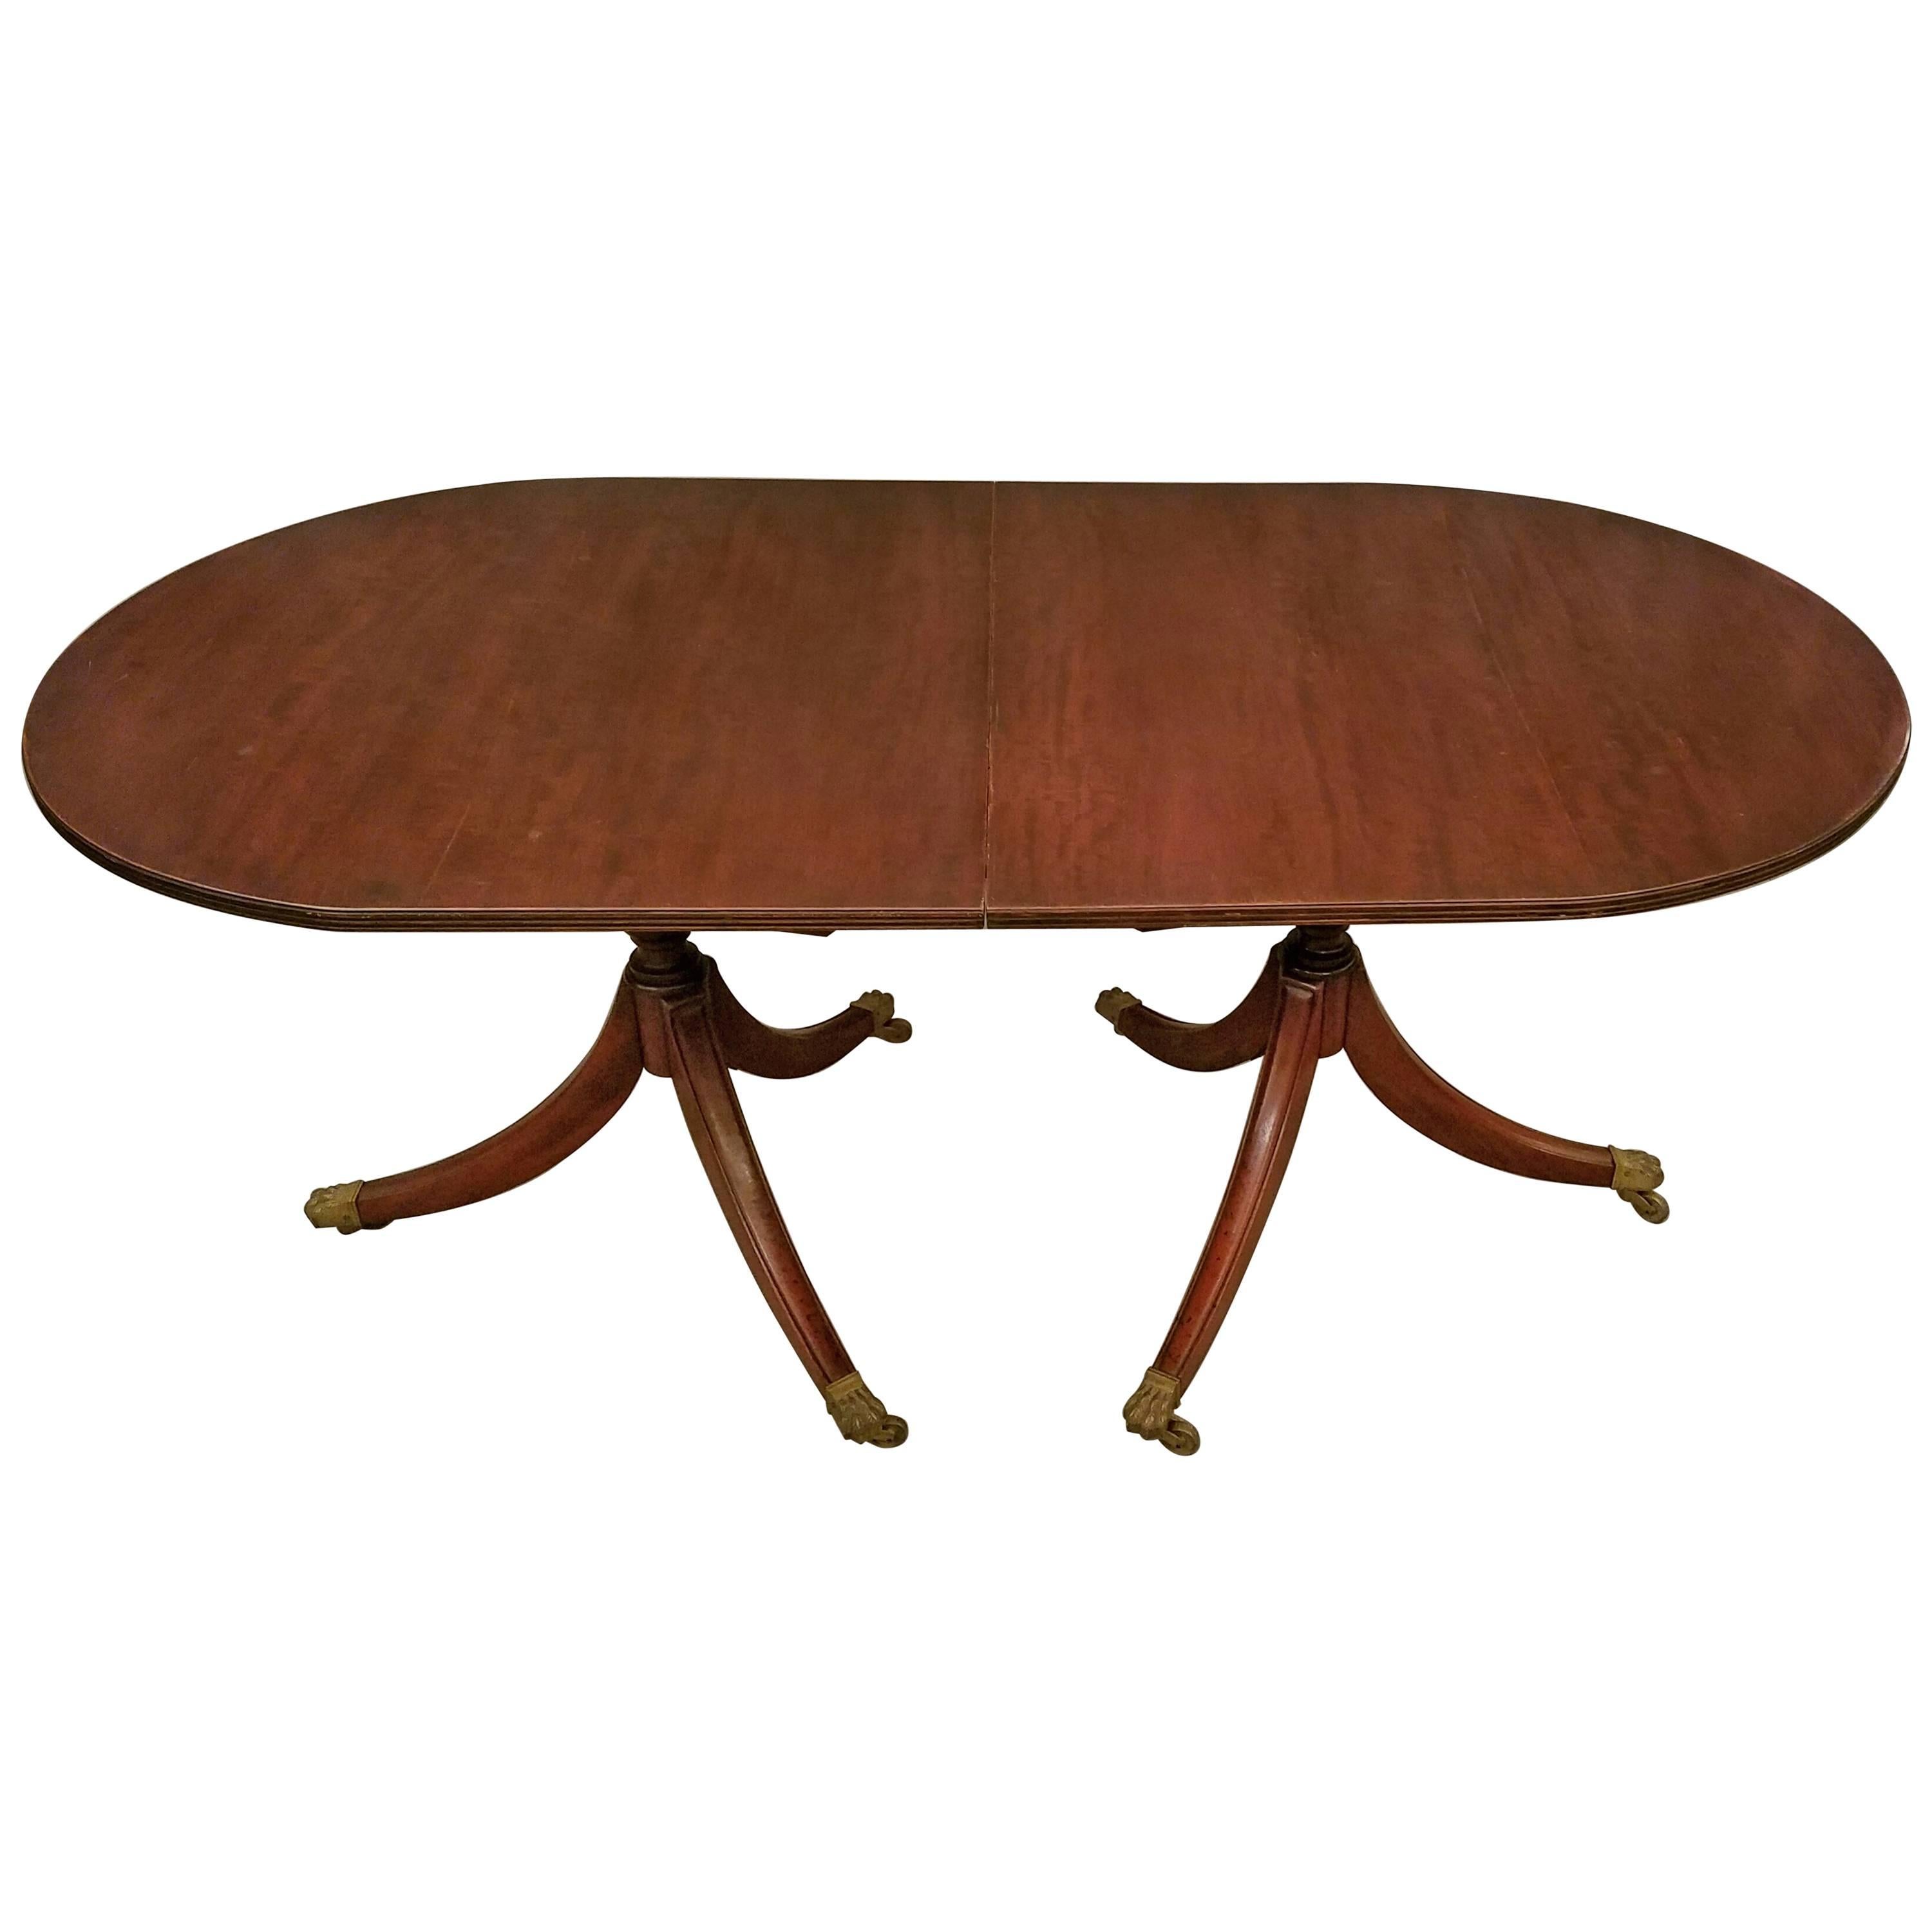 19th Century English Regency Mahogany Double Pedestal Dining / Breakfast Table For Sale